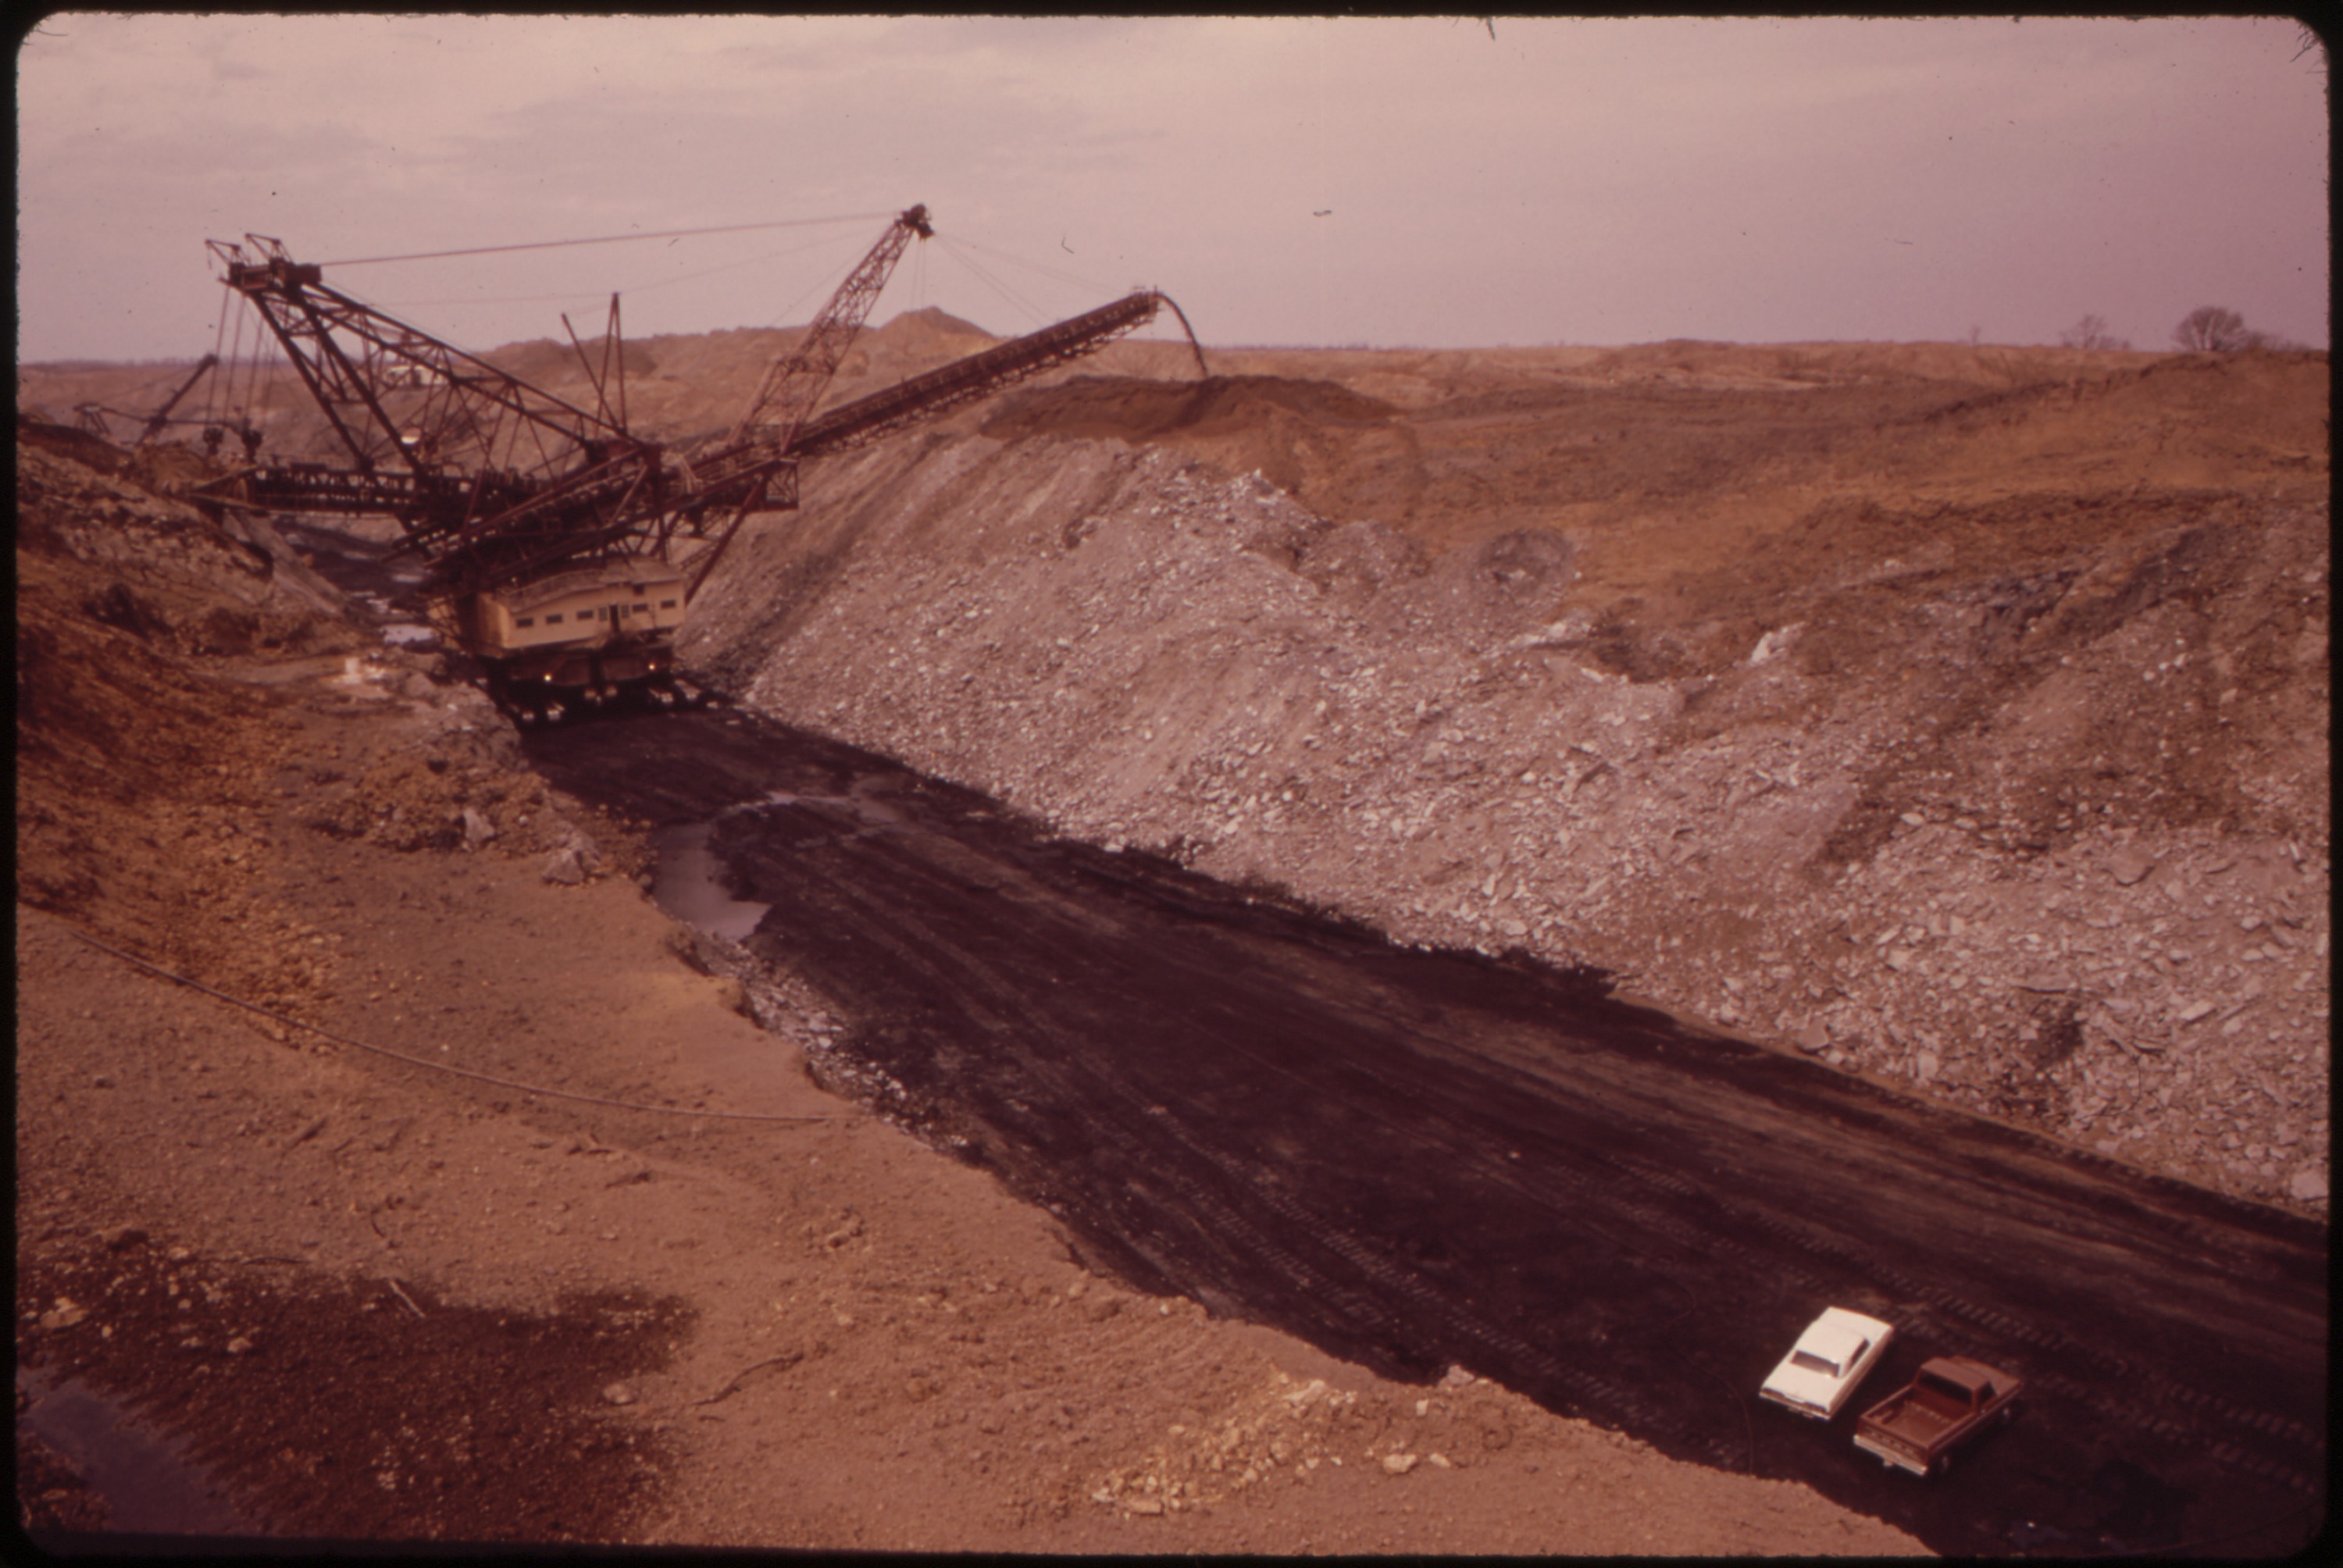 HUGH_STRIP_MINING_MACHINERY_IN_OPERATION_NEAR_DUNFERMLINE_IN_FULTON_COUNTY._FULTON_COUNTY_HAS_BEEN,_AND_IS,_A_CENTER..._-_NARA_-_552416.jpg